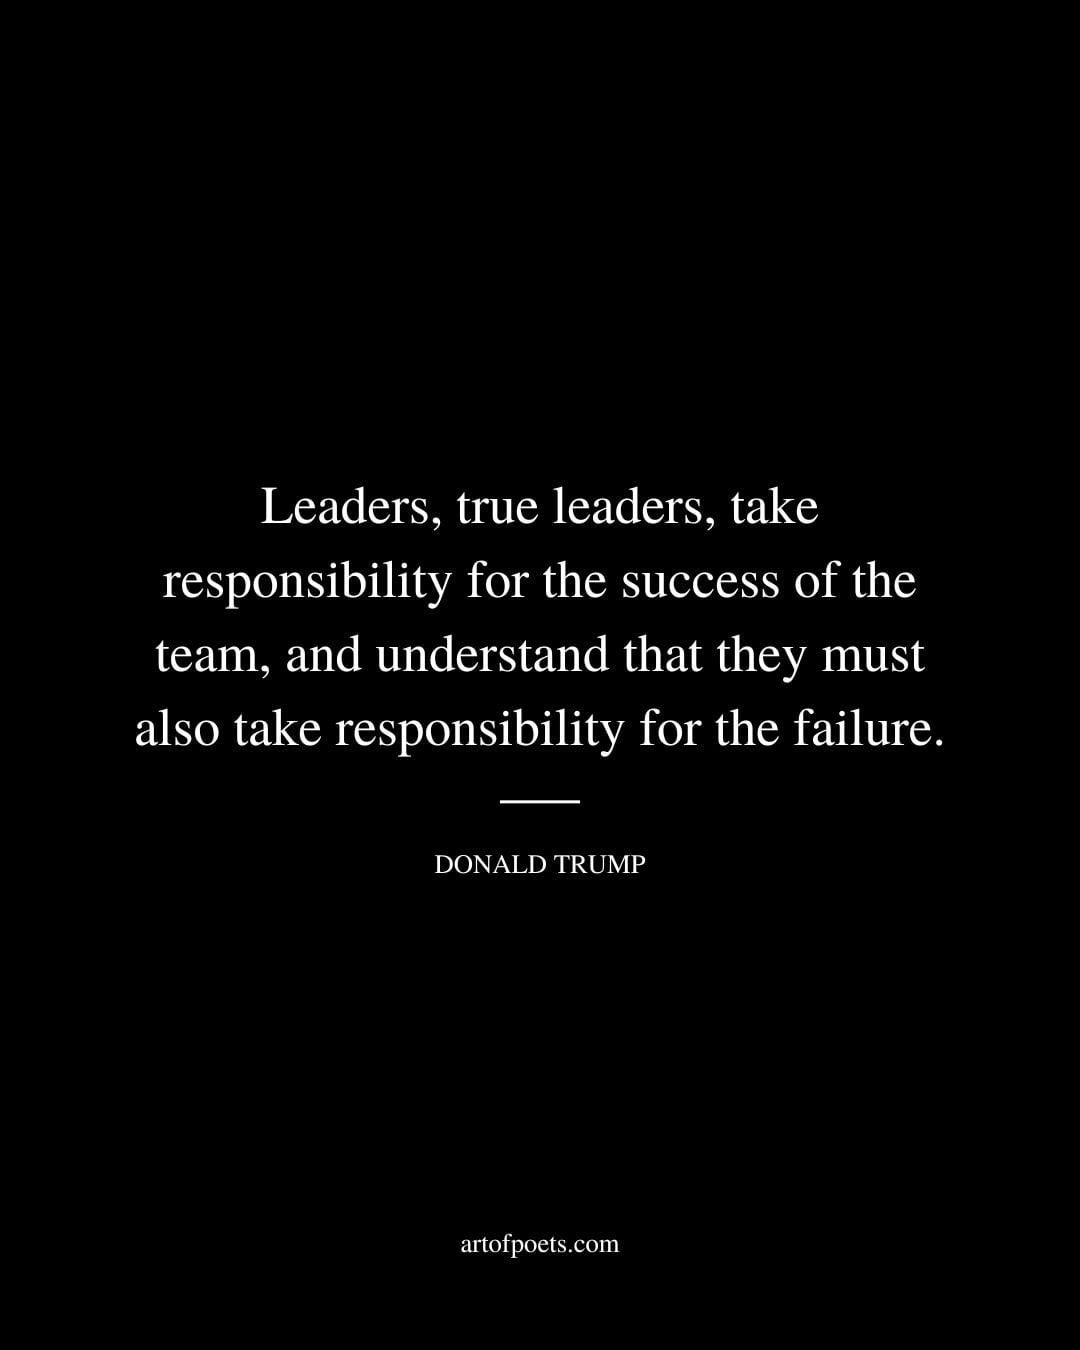 Leaders true leaders take responsibility for the success of the team and understand that they must also take responsibility for the failure